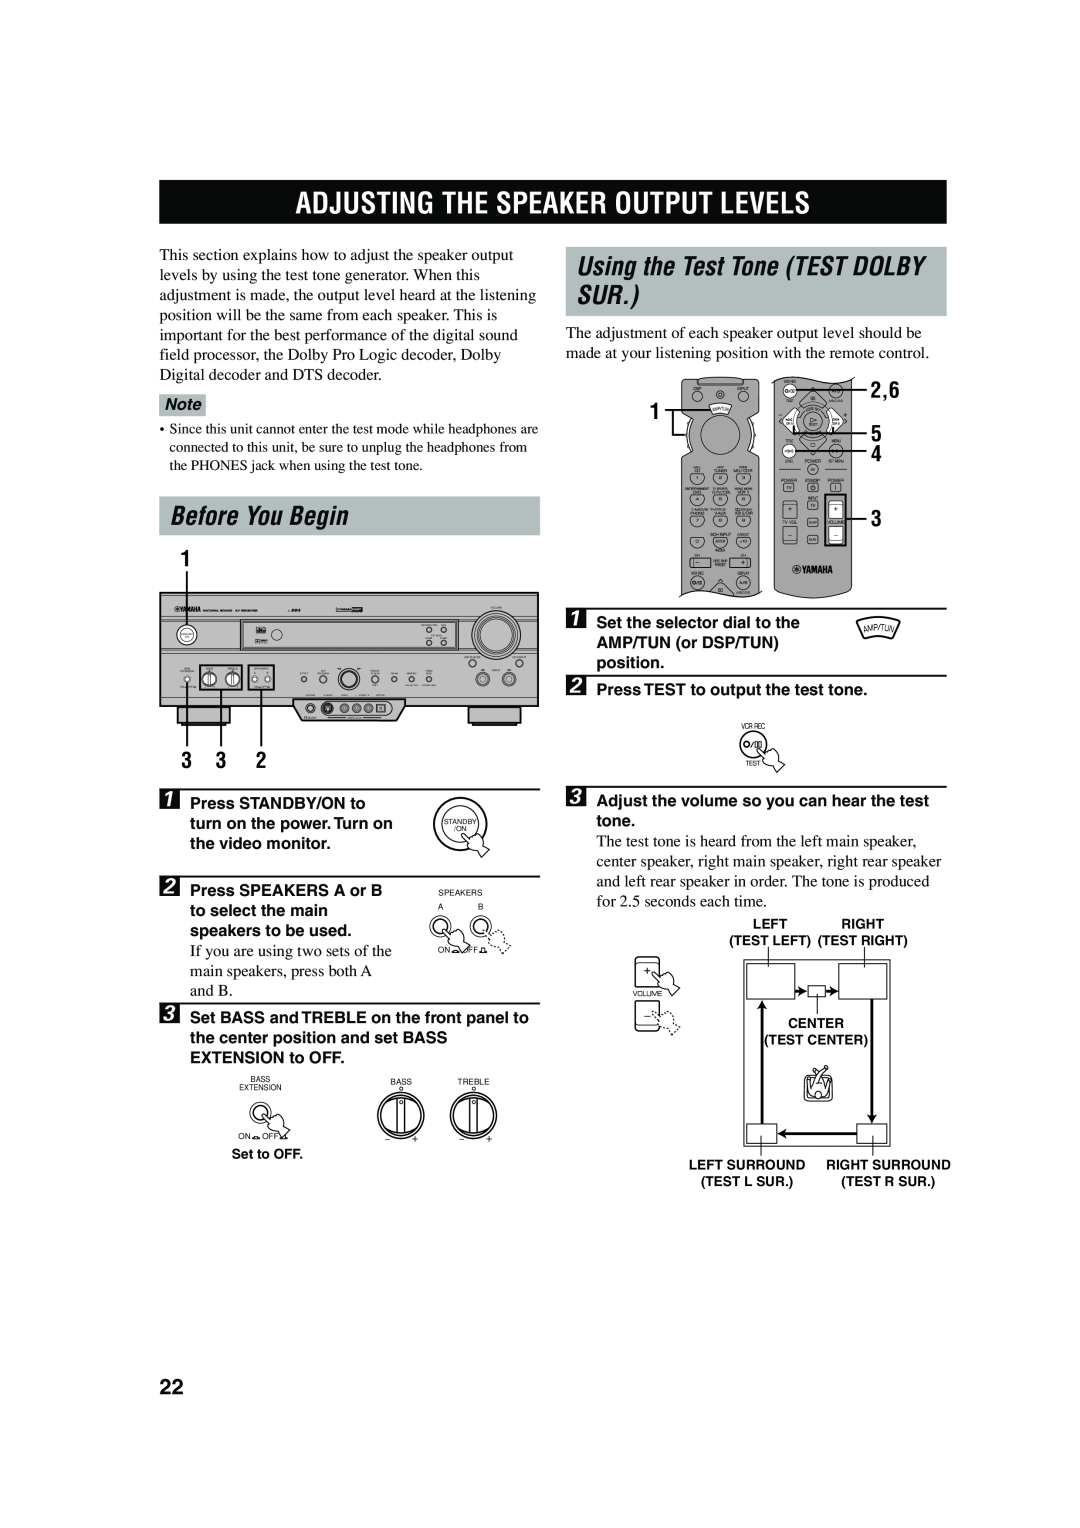 Yamaha RX-V620RDS owner manual Adjusting The Speaker Output Levels, Before You Begin, Using the Test Tone TEST DOLBY, 1 5 